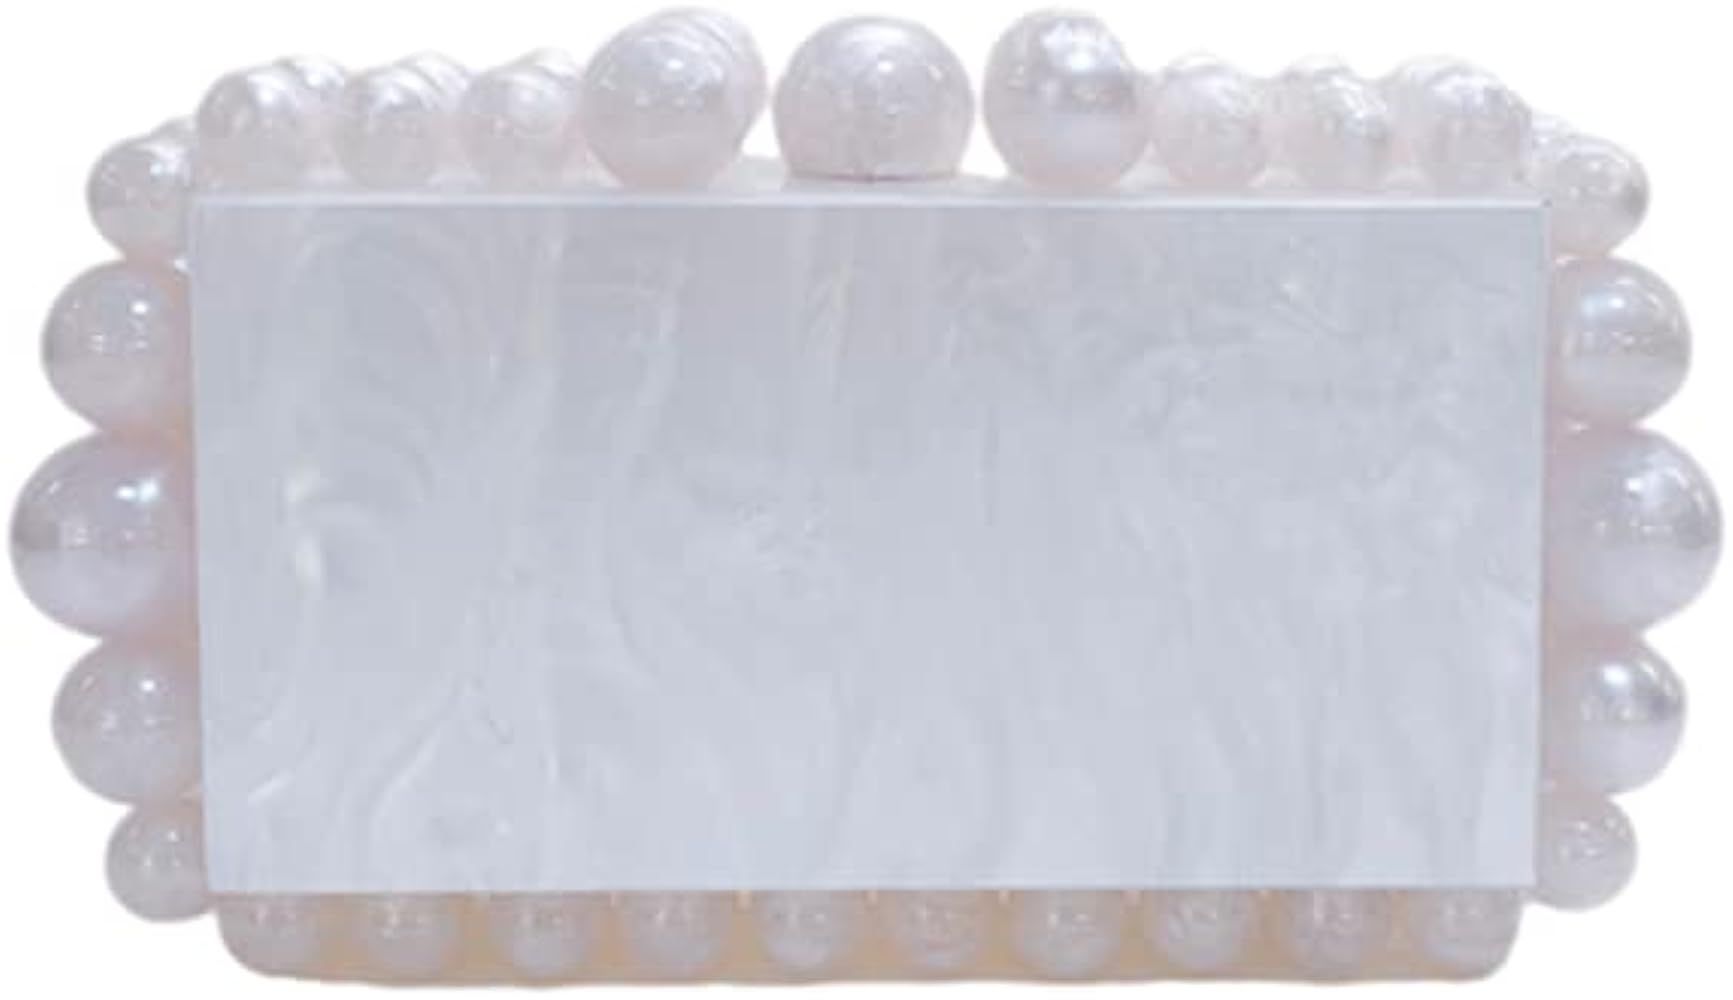 AZWBAG Women's Evening Bag Sparkly Pearl Purse Bling Acrylic Square Clutch Purse | Amazon (US)